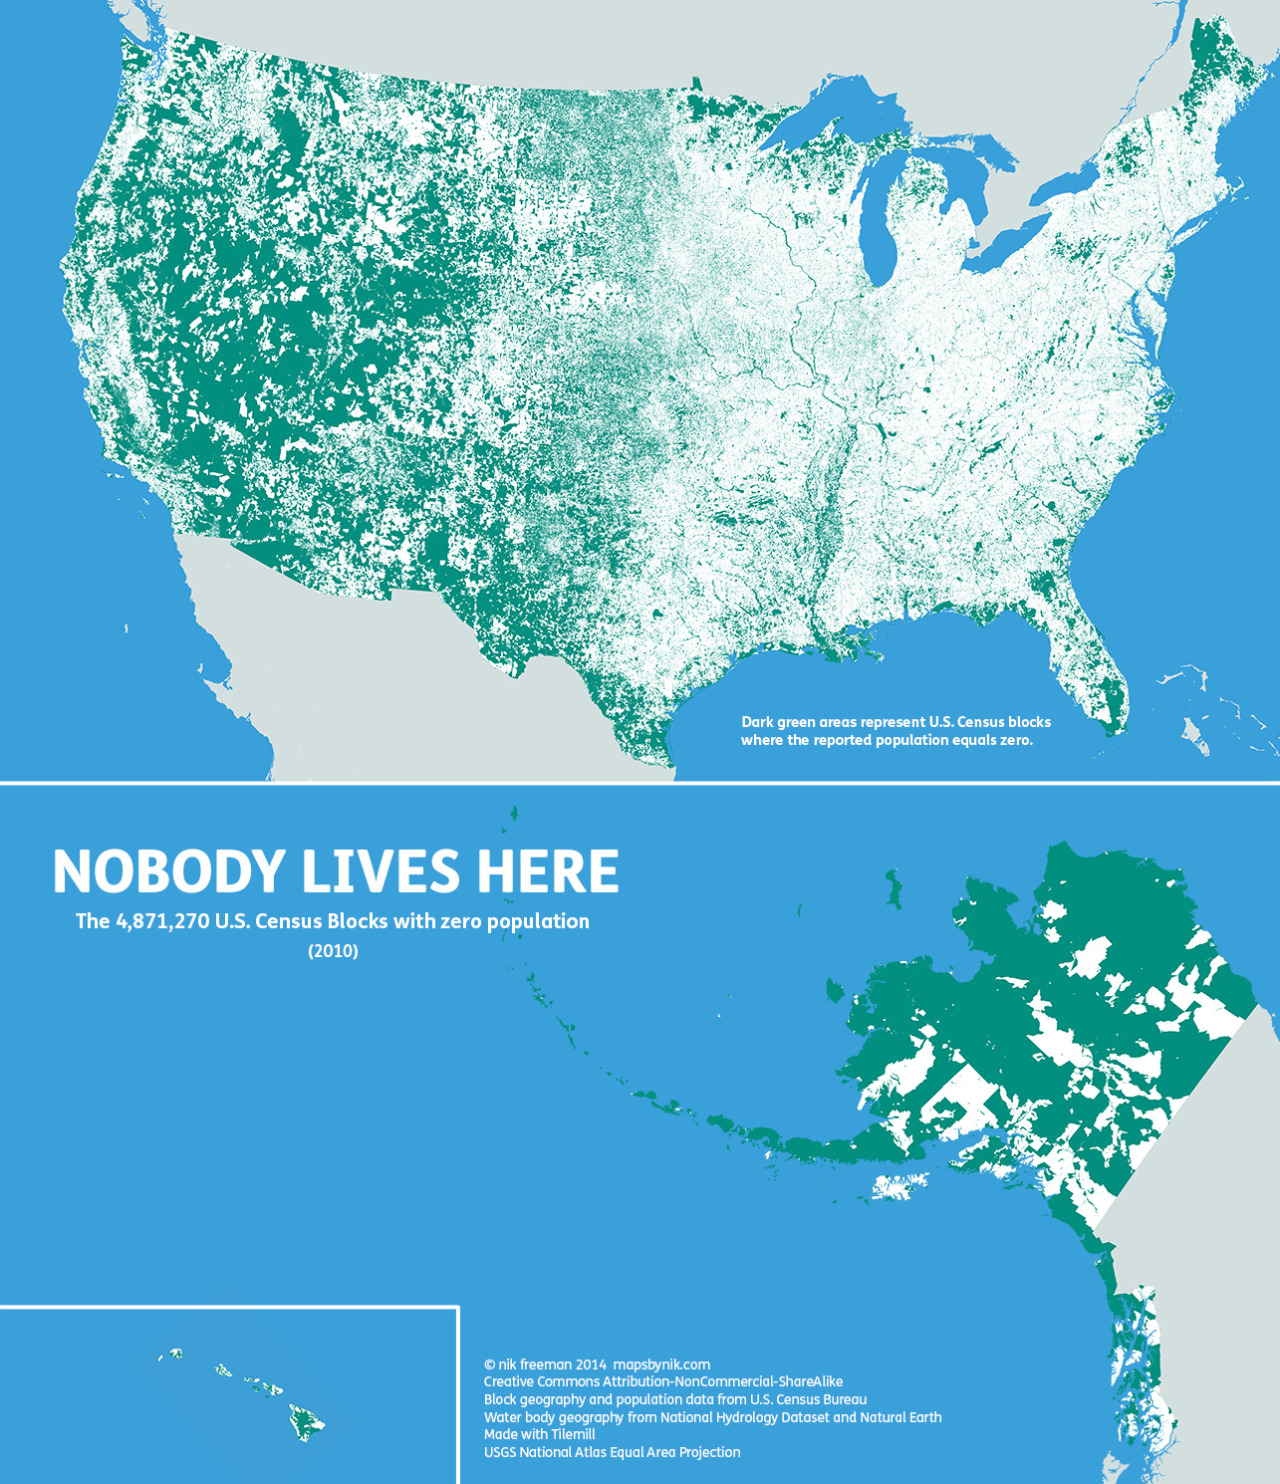 Nobody lives here: The nearly 5 million Census Blocks with zero population

A Block is the smallest area unit used by the U.S. Census Bureau for tabulating statistics. As of the 2010 census, the United States consists of 11,078,300 Census Blocks. Of them, 4,871,270 blocks totaling 4.61 million square kilometers were reported to have no population living inside them. Despite having a population of more than 310 million people, 47 percent of the USA remains unoccupied.

Green shading indicates unoccupied Census Blocks. A single inhabitant is enough to omit a block from shading

Quick update: If you&#8217;re the kind of map lover who cares about cartographic accuracy, check out the new version which fixes the Gulf of California. If you save this map for your own projects, please use this one instead.

Map observations

The map tends to highlight two types of areas:

places where human habitation is physically restrictive or impossible, and
places where human habitation is prohibited by social or legal convention.
Water features such lakes, rivers, swamps and floodplains are revealed as places where it is hard for people to live. In addition, the mountains and deserts of the West, with their hostility to human survival, remain largely void of permanent population.

Of the places where settlement is prohibited, the most apparent are wilderness protection and recreational areas (such as national and state parks) and military bases. At the national and regional scales, these places appear as large green tracts surrounded by otherwise populated countryside.

At the local level, city and county parks emerge in contrast to their developed urban and suburban surroundings. At this scale, even major roads such as highways and interstates stretch like ribbons across the landscape.

Commercial and industrial areas are also likely to be green on this map. The local shopping mall, an office park, a warehouse district or a factory may have their own Census Blocks. But if people don&#8217;t live there, they will be considered &#8220;uninhabited&#8221;. So it should be noted that just because a block is unoccupied, that does not mean it is undeveloped.

Perhaps the two most notable anomalies on the map occur in Maine and the Dakotas. Northern Maine is conspicuously uninhabited. Despite being one of the earliest regions in North America to be settled by Europeans, the population there remains so low that large portions of the state&#8217;s interior have yet to be politically organized.

In the Dakotas, the border between North and South appears to be unexpectedly stark. Geographic phenomena typically do not respect artificial human boundaries. Throughout the rest of the map, state lines are often difficult to distinguish. But in the Dakotas, northern South Dakota is quite distinct from southern North Dakota. This is especially surprising considering that the county-level population density on both sides of the border is about the same at less than 10 people per square mile.

Finally, the differences between the eastern and western halves of the contiguous 48 states are particularly stark to me. In the east, with its larger population, unpopulated places are more likely to stand out on the map. In the west, the opposite is true. There, population centers stand out against the wilderness.

::

Ultimately, I made this map to show a different side of the United States. Human geographers spend so much time thinking about where people are. I thought I might bring some new insight by showing where they are not, adding contrast and context to the typical displays of the country&#8217;s population geography.

I&#8217;m sure I&#8217;ve all but scratched the surface of insight available from examining this map. There&#8217;s a lot of data here. What trends and patterns do you see?

Errata

The Gulf of California is missing from this version. I guess it got filled in while doing touch ups. Oops. There&#8217;s a link to a corrected map at the top of the post.
Some islands may be missing if they were not a part of the waterbody data sets I used.
::

©mapsbynik 2014
Creative Commons Attribution-NonCommercial-ShareAlike
Block geography and population data from U.S. Census Bureau
Water body geography from National Hydrology Dataset and Natural Earth
Made with Tilemill
USGS National Atlas Equal Area Projection